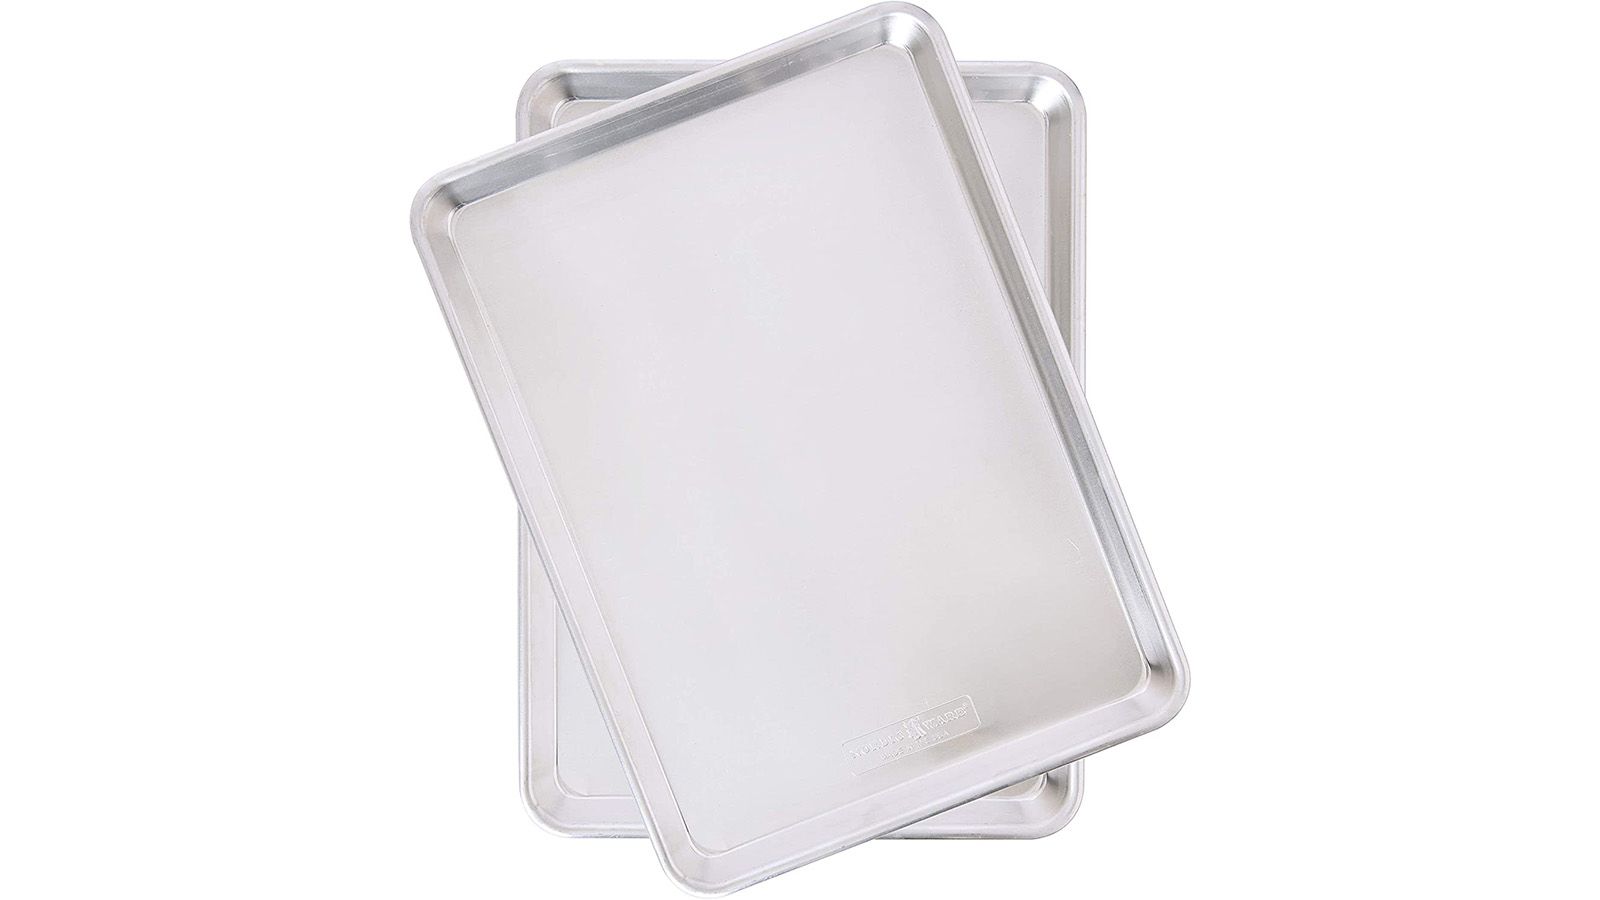 Product Card Nordic Ware Best Baking Sheet ?q=h 900,w 1600,x 0,y 0